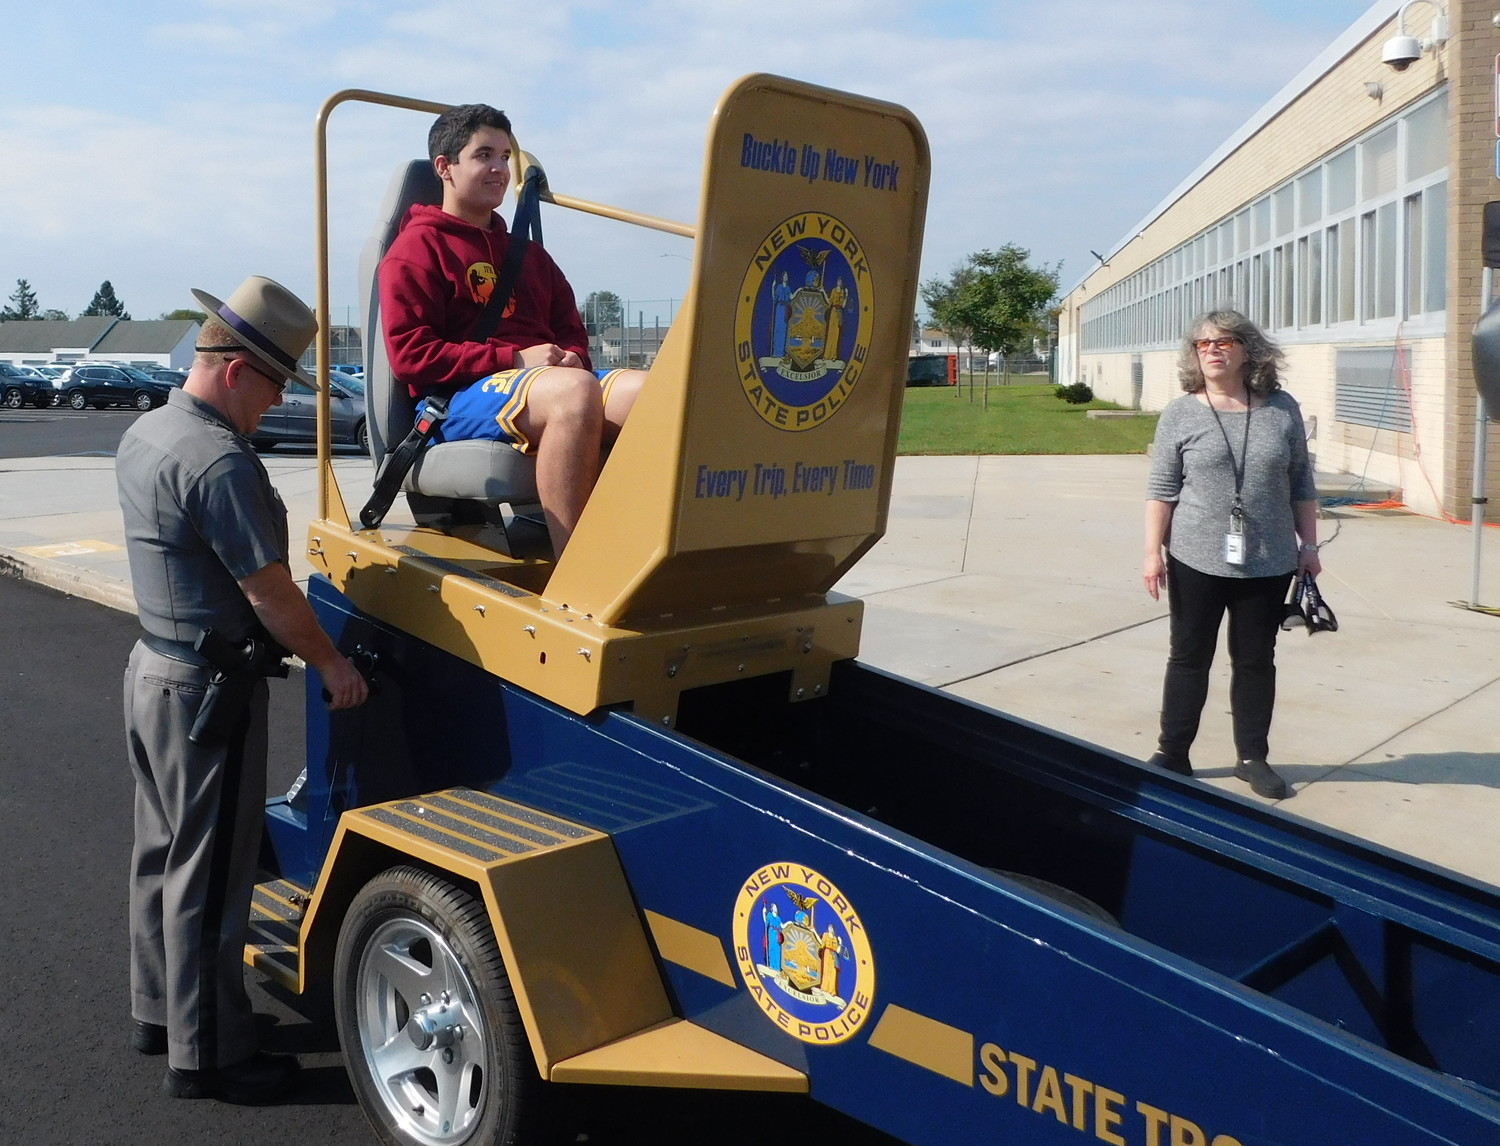 The “seat belt convincer” was brought to John F. Kennedy High School. Daniel Delgado buckled in and received a five- to seven-mile-per-hour jolt, experiencing what a minor car accident feels like.